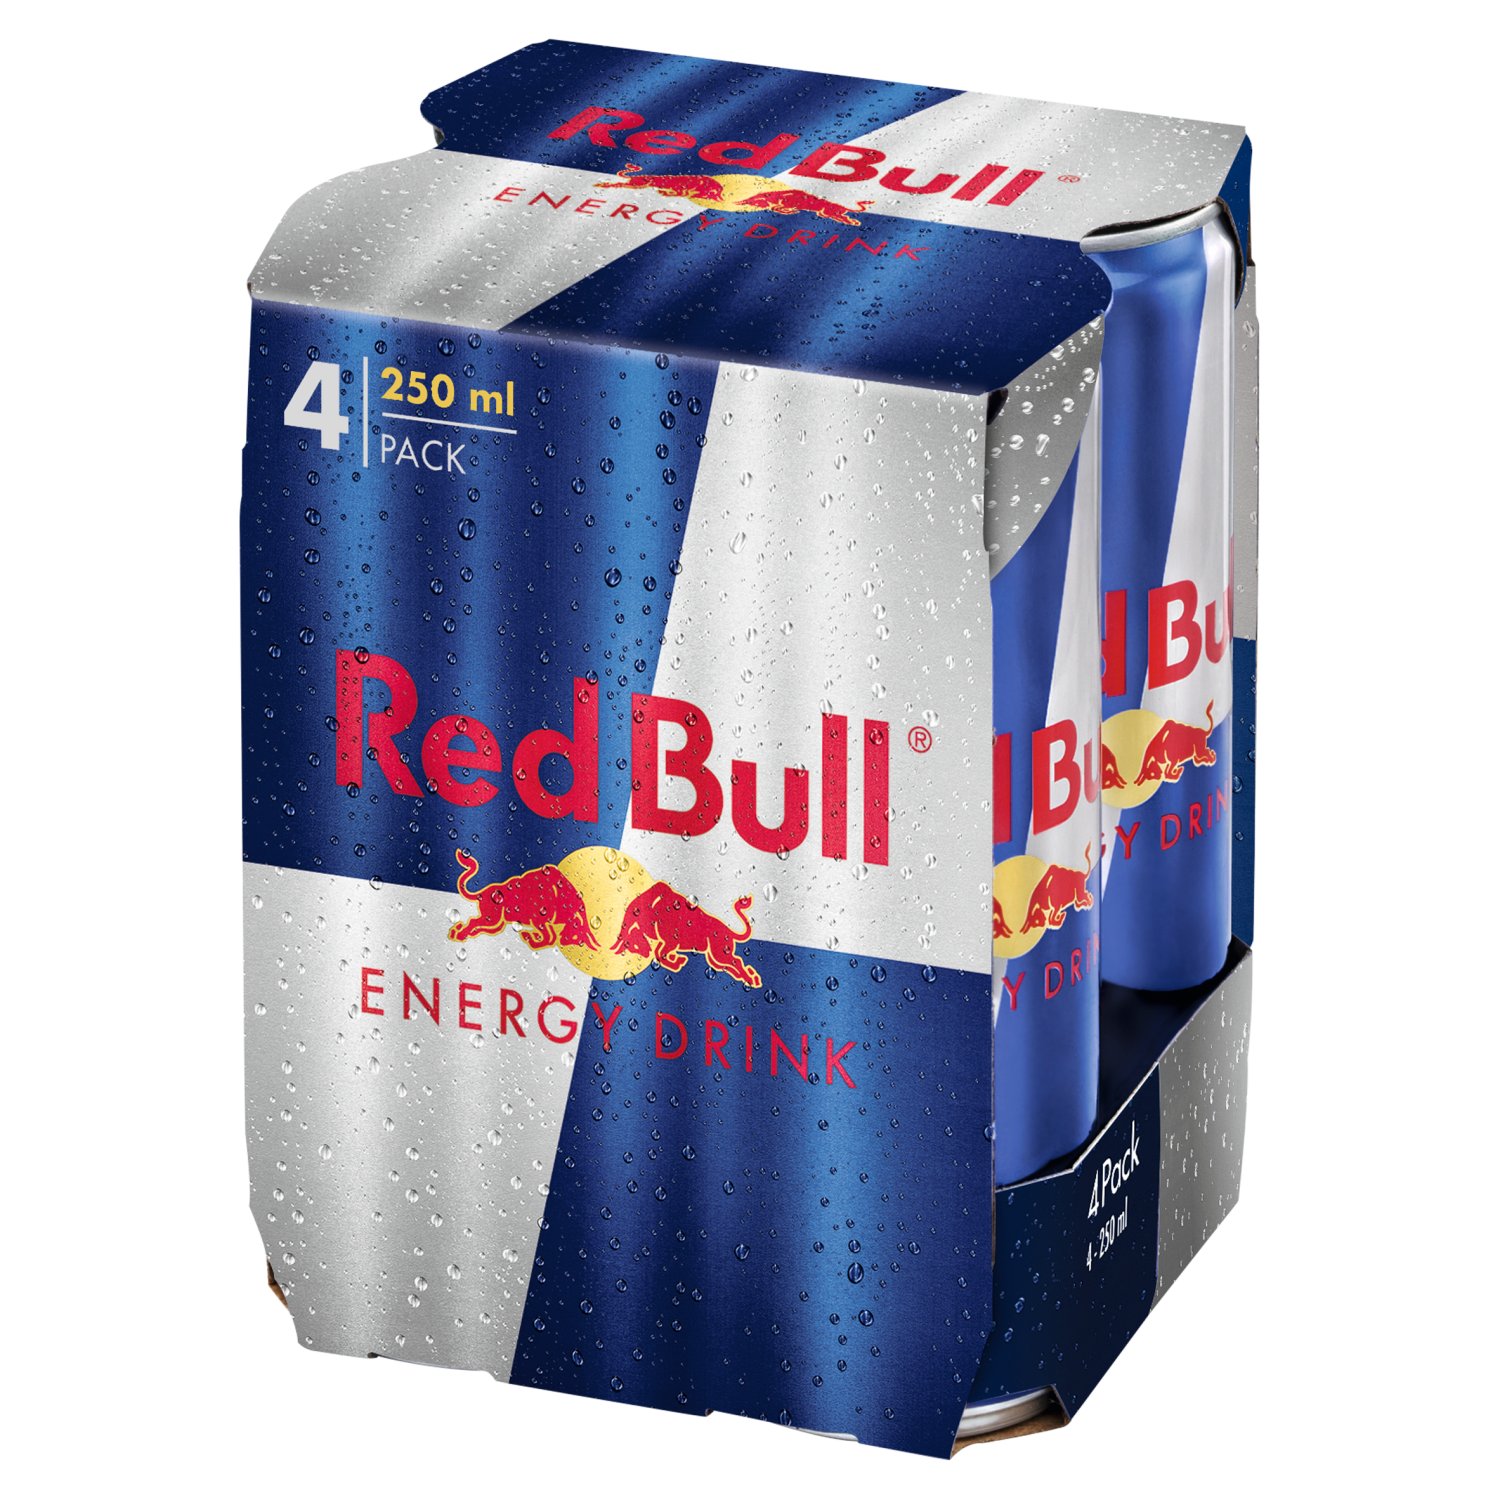 Red Bull Energy Drink Cans 4 Pack (250 ml)